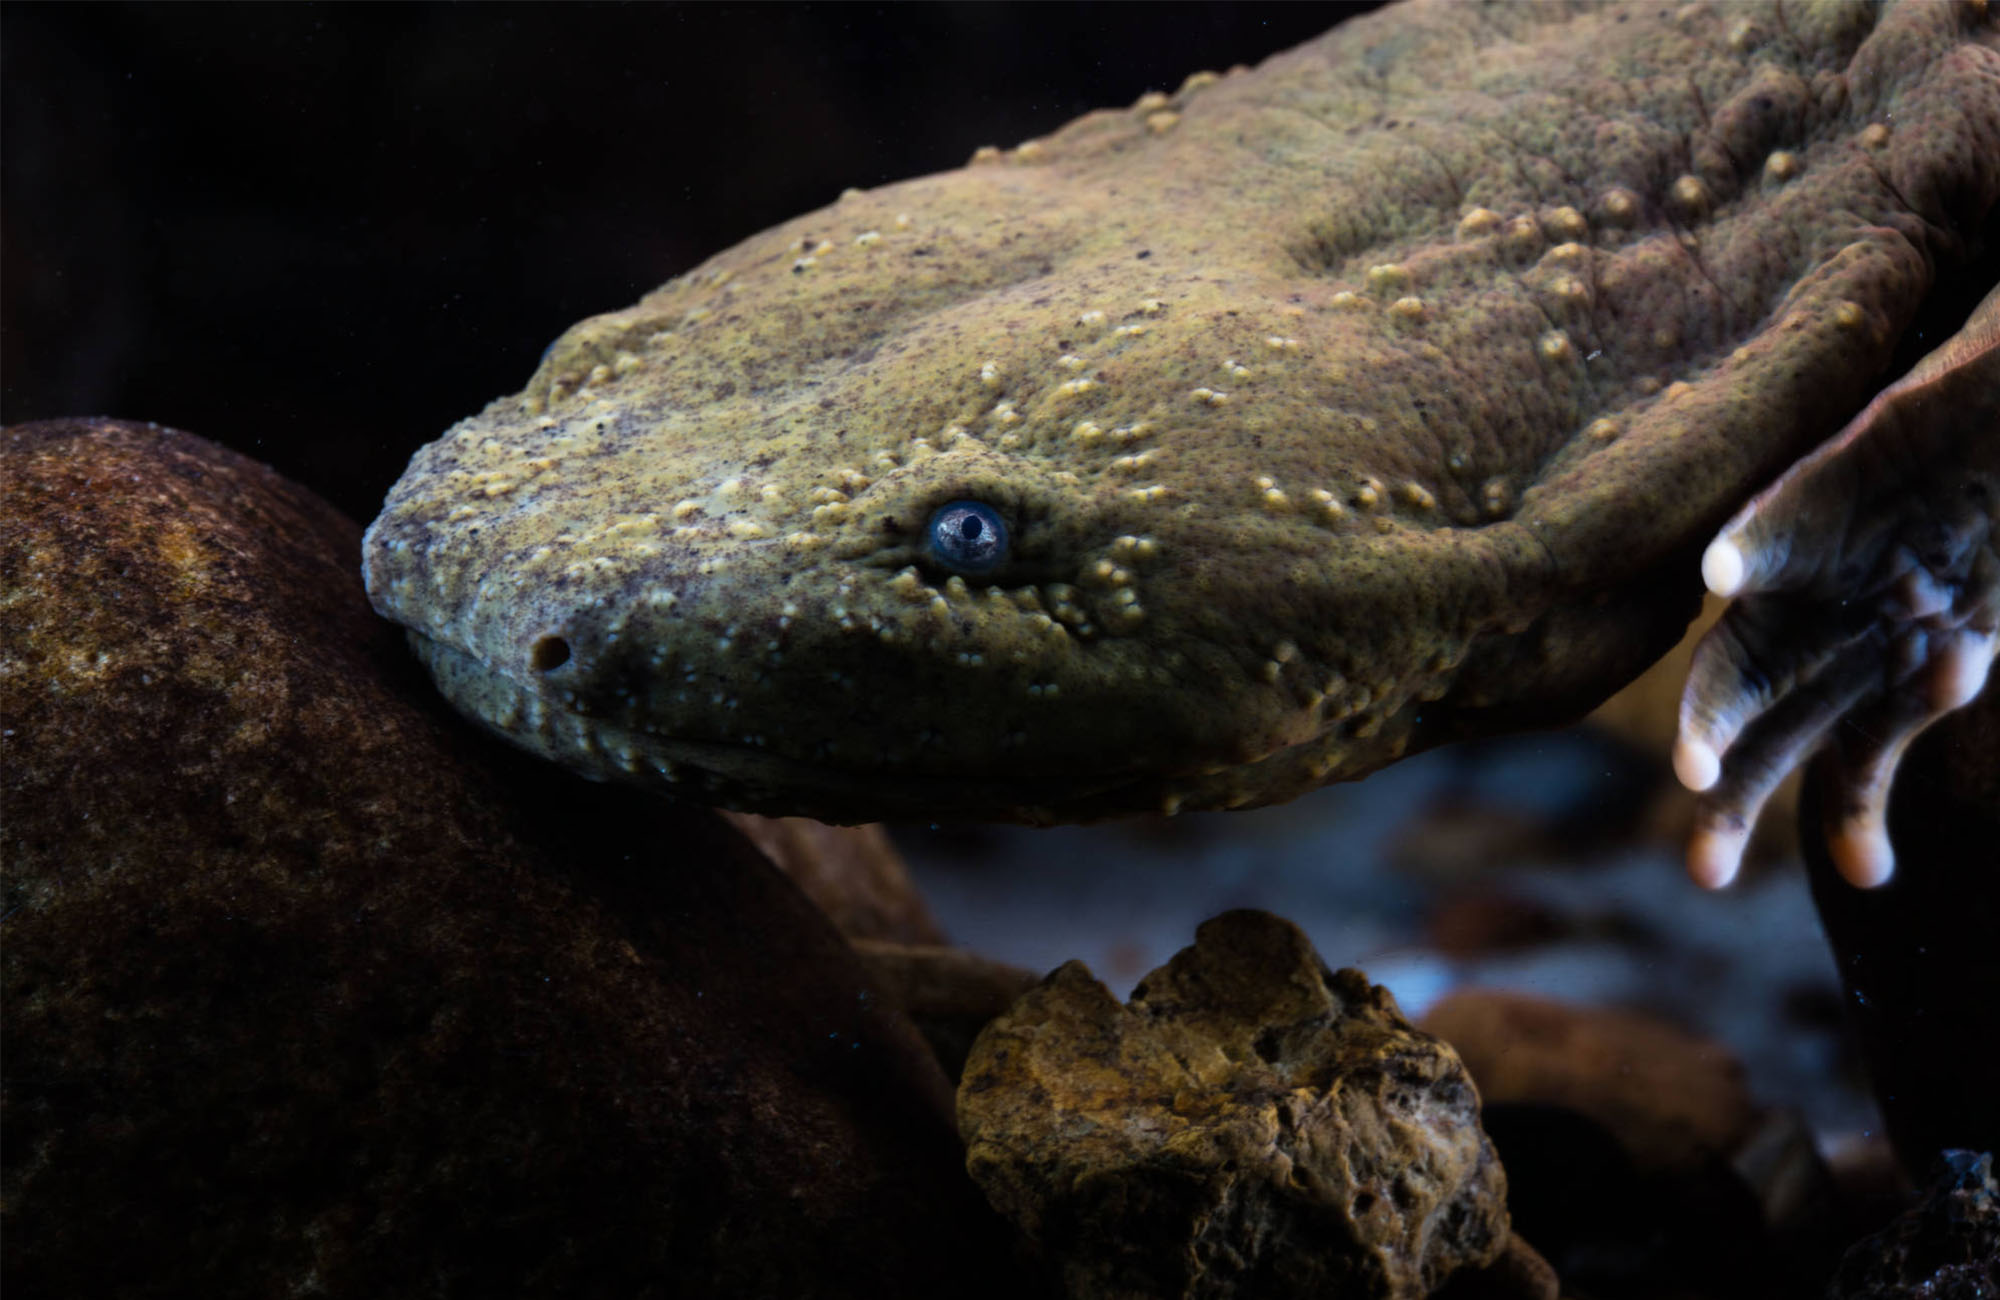 Hellbender salamanders may look scary, but the real fright is extinction